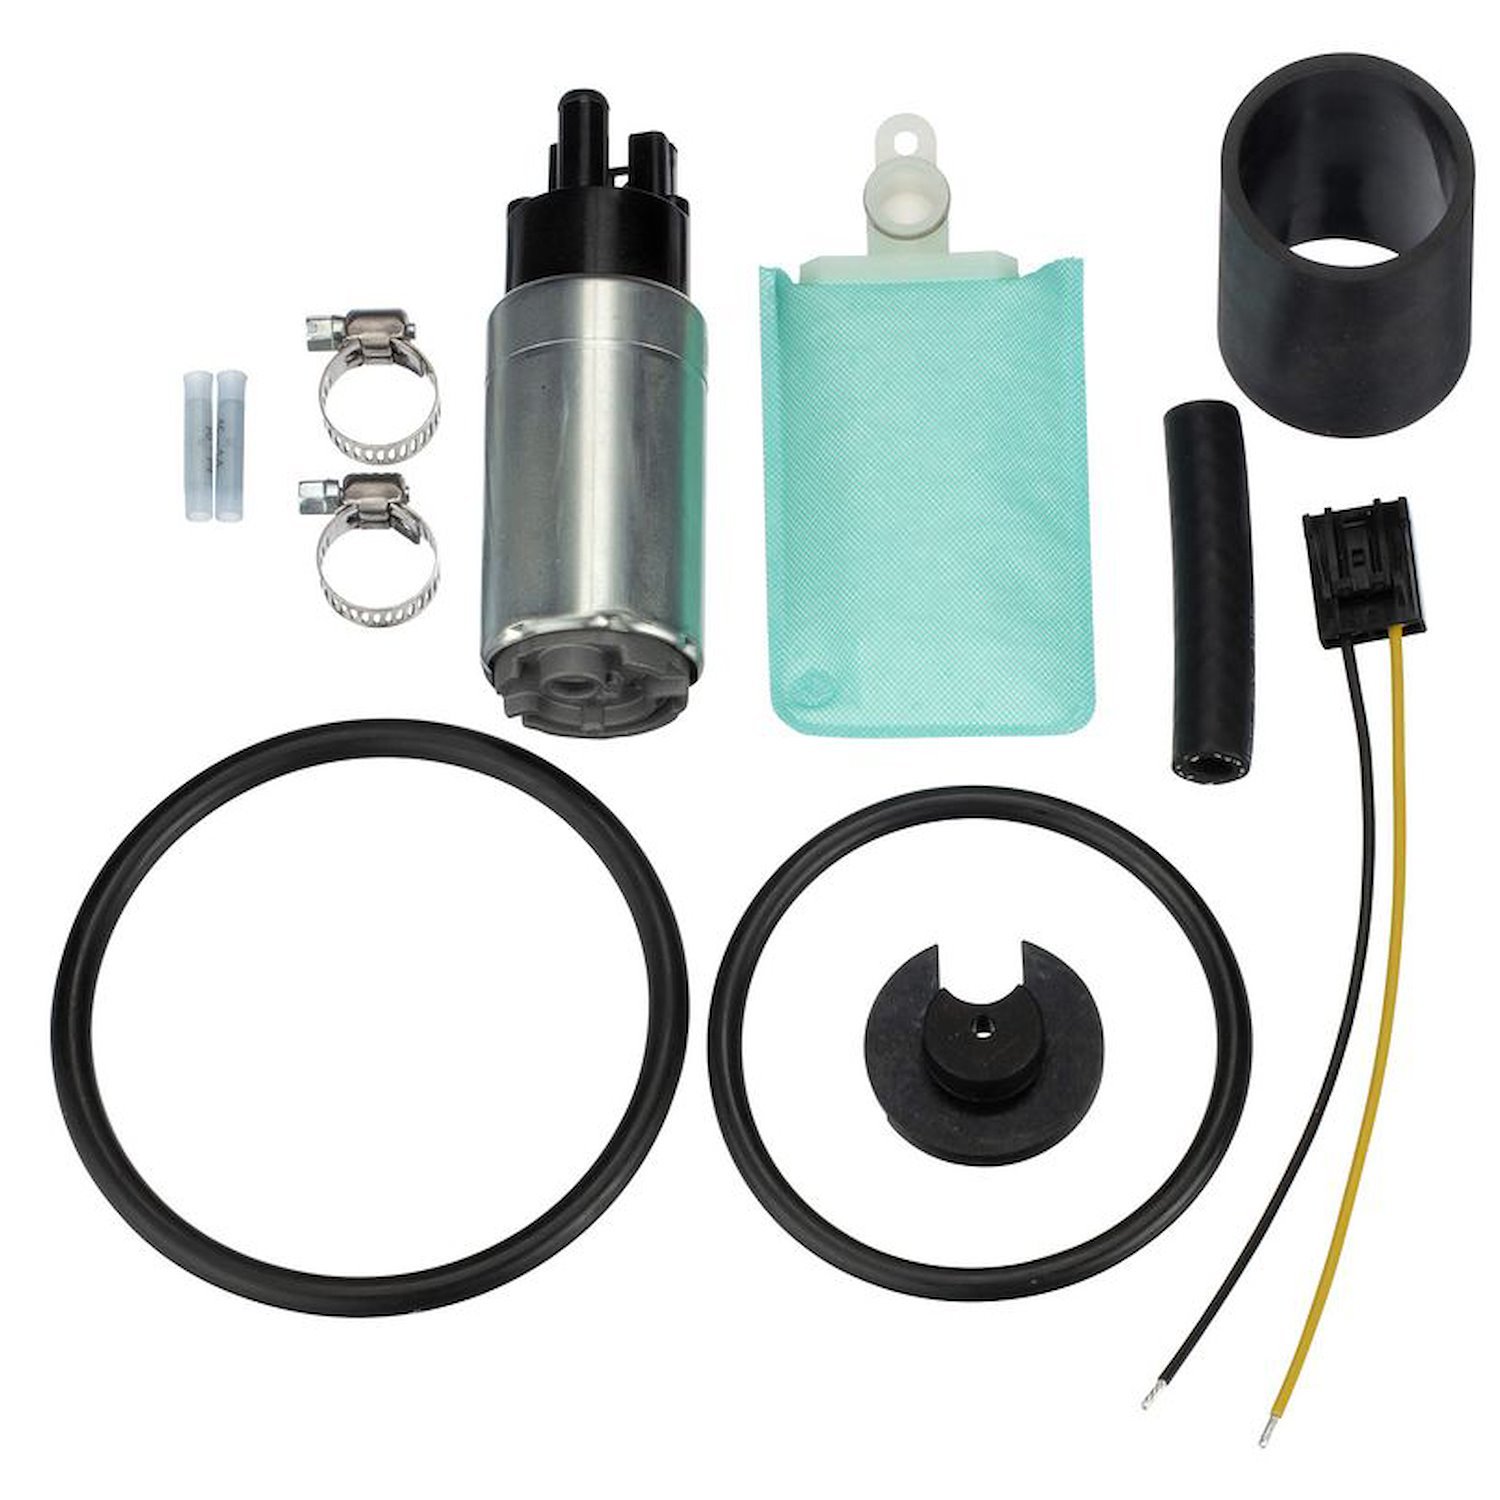 EFI In-Tank Electric Fuel Pump And Strainer Set for Multiple Makes